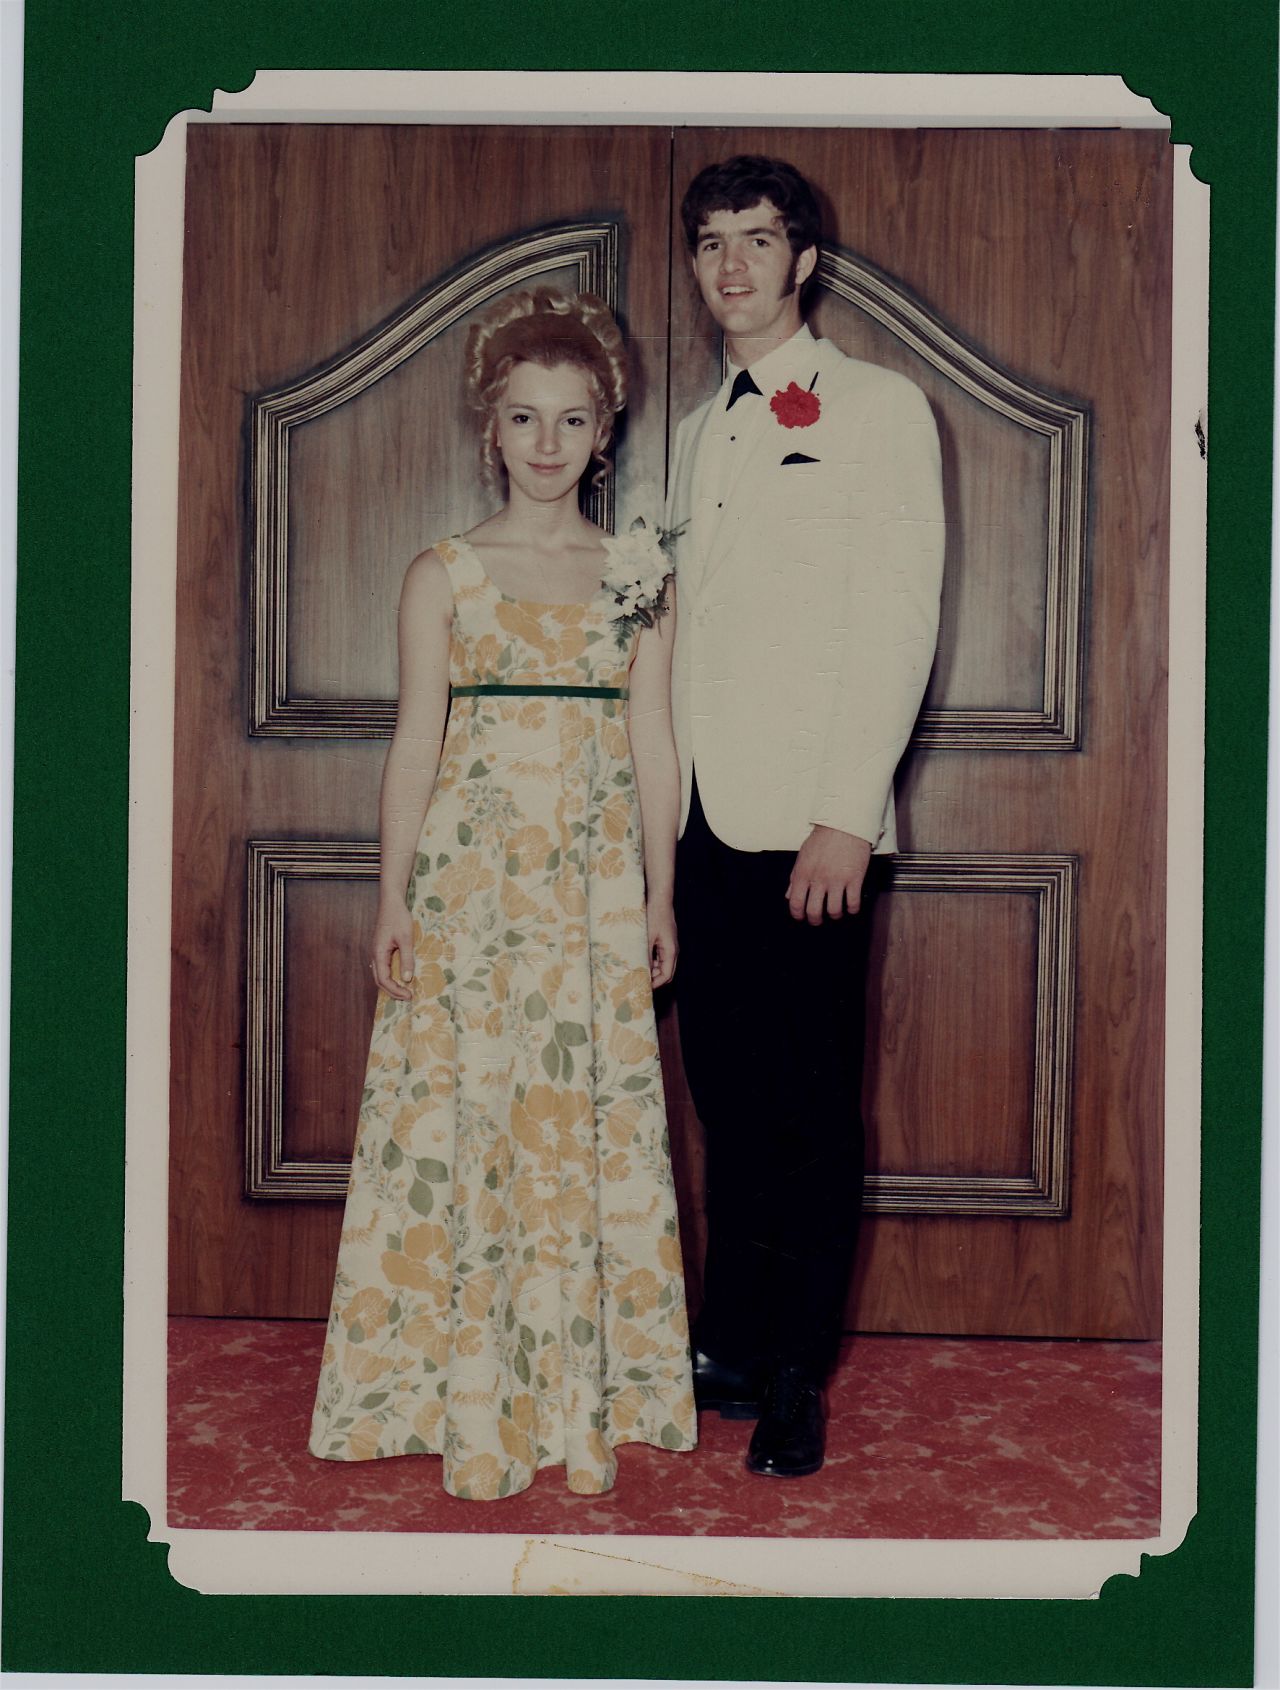 1968: <a href="http://ireport.cnn.com/people/pathill3">Patricia Helen Hill</a> and her future husband, Bob, went to the Westwood High School prom in Winnipeg, Manitoba. "My mother actually made the dress and it was very heavy," she said, "more like drapery material." She changed out of the dress after the dance and went on a riverboat cruise. "Everyone at the prom was invited!" she said.  